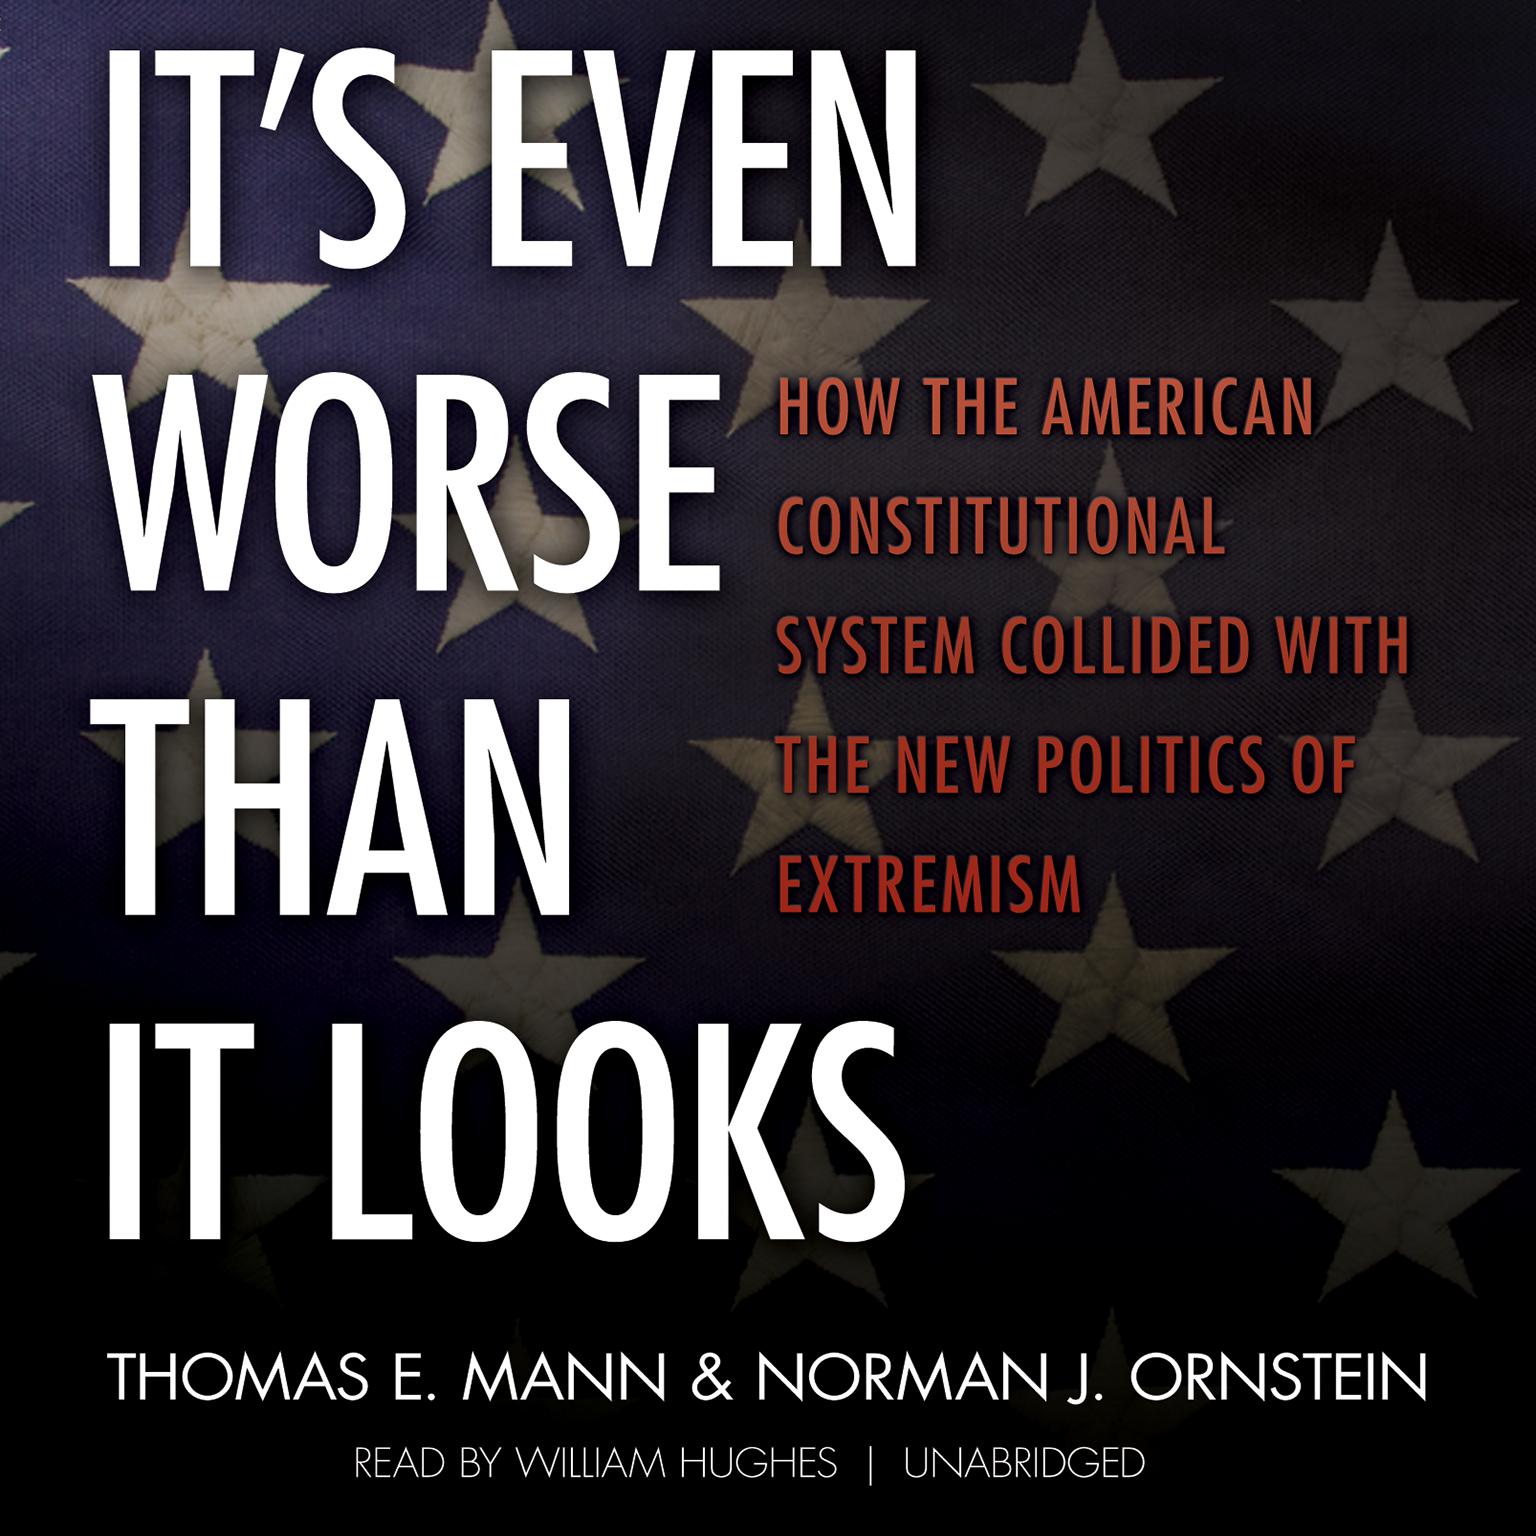 It’s Even Worse Than It Looks: How the American Constitutional System Collided with the New Politics of Extremism Audiobook, by Thomas E. Mann